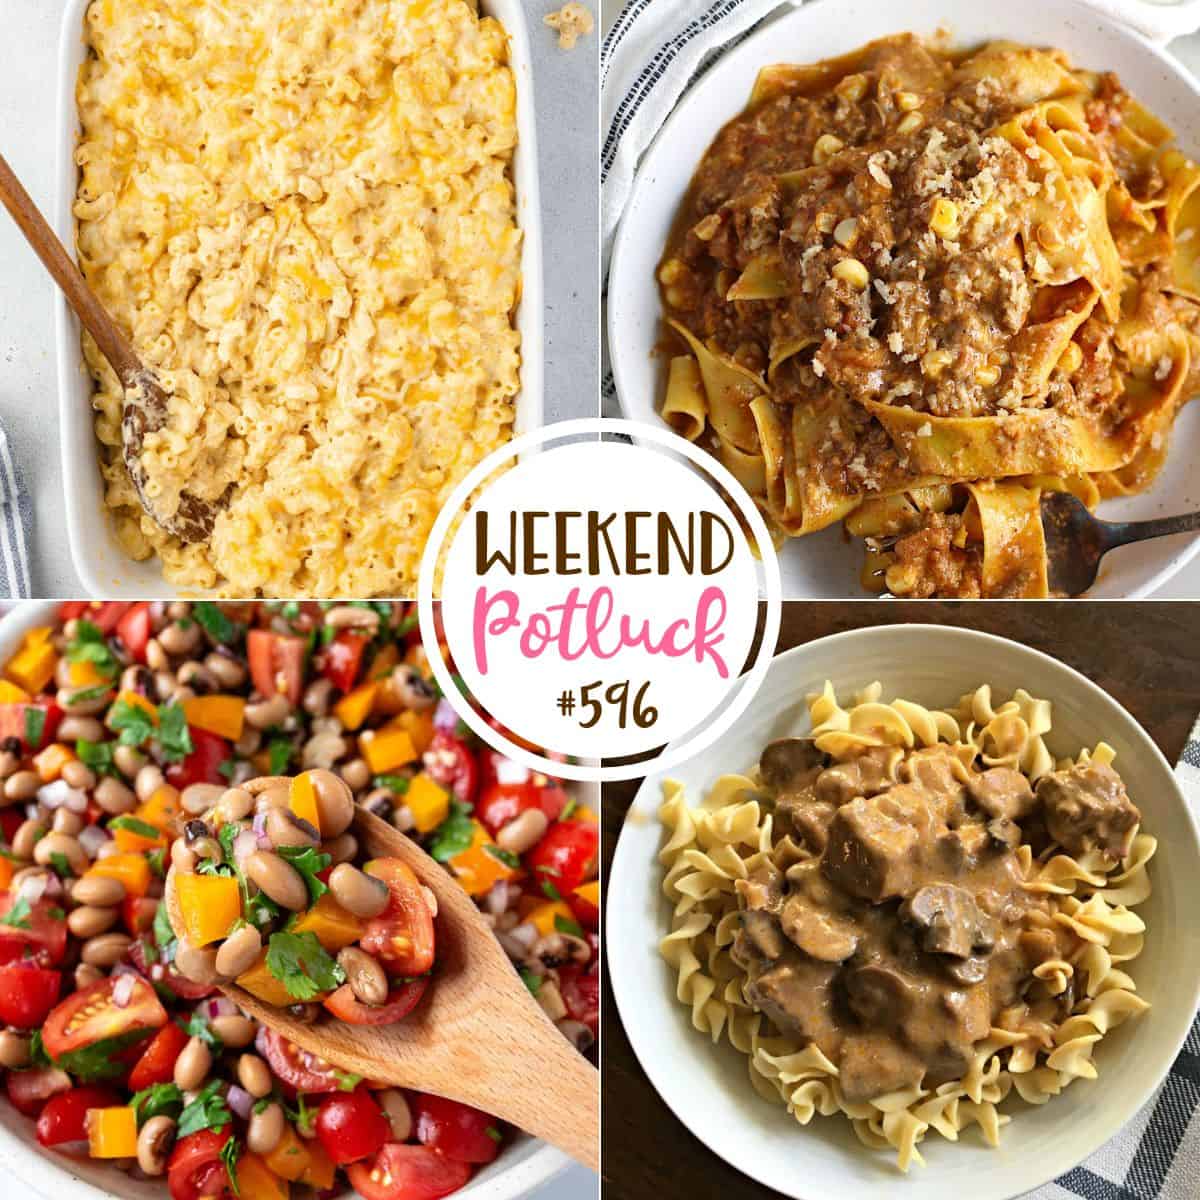 Ultimate Mac and Cheese – Weekend Potluck #596